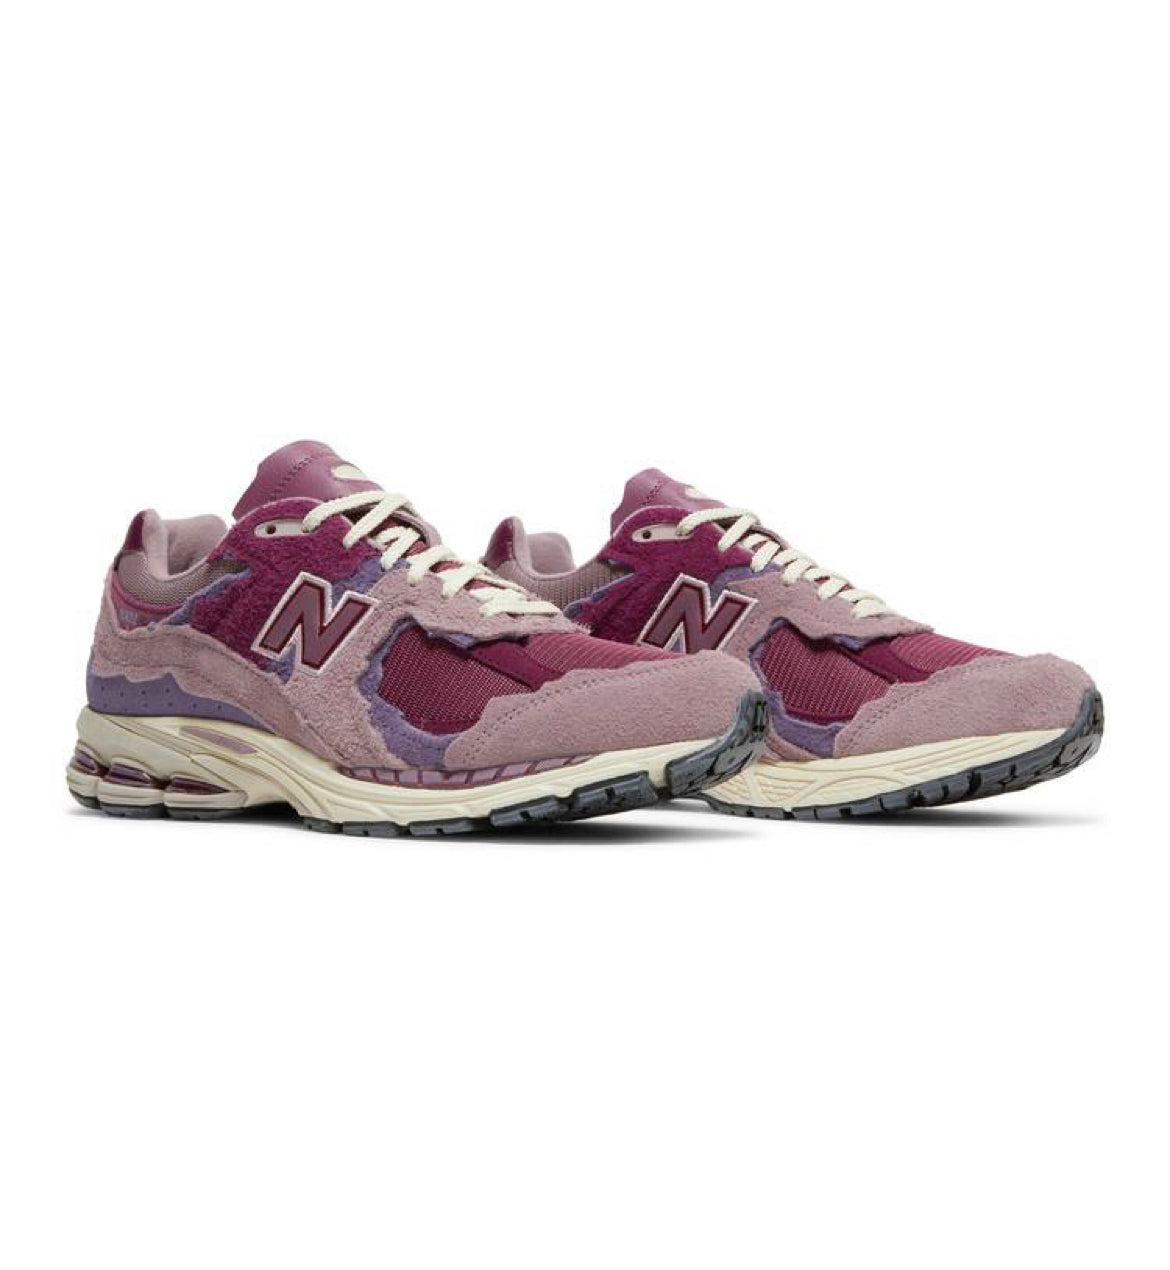 NB 2002R Protection Pack ‘Pink’ M2002RDH